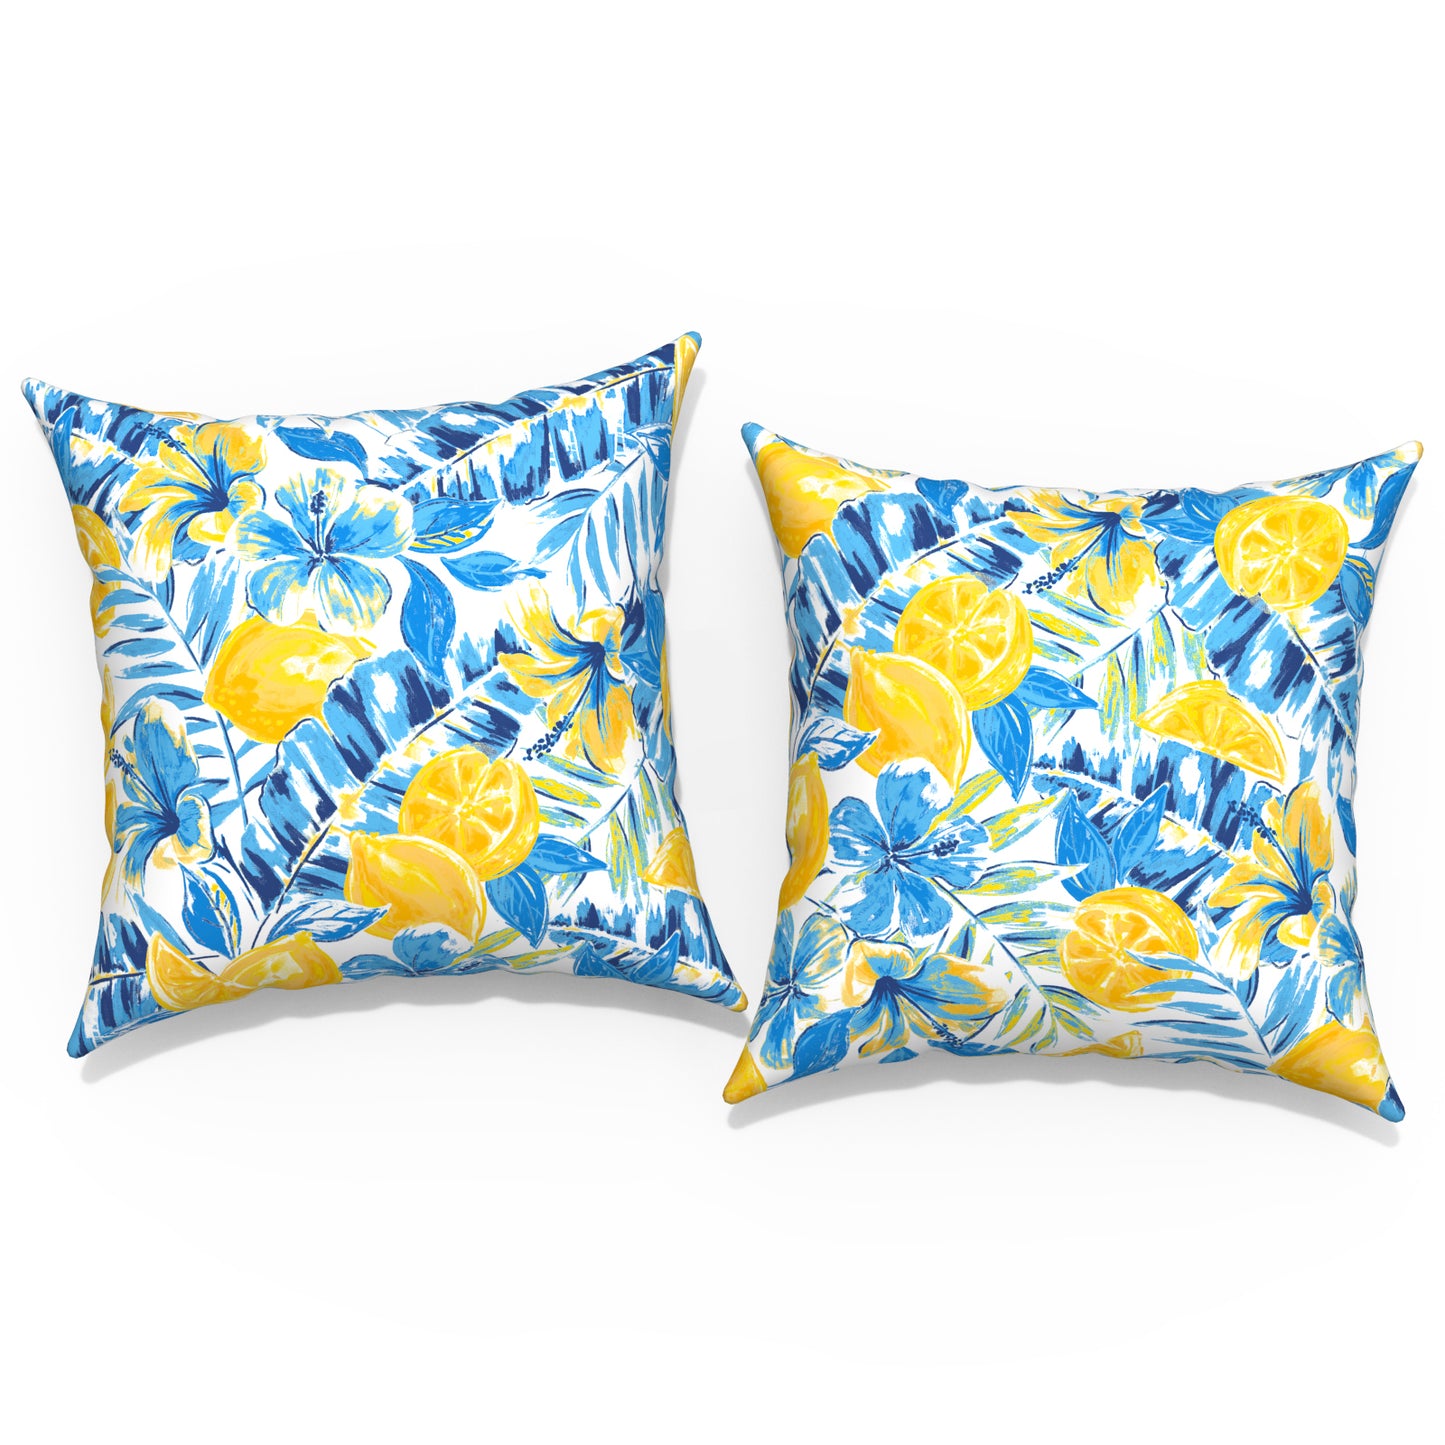 Melody Elephant Outdoor/Indoor Throw Pillow Covers Set of 2, All Weather Square Pillow Cases 16x16 Inch, Patio Cushion Pillow of Home Furniture Use, Lemon Blossom Blue